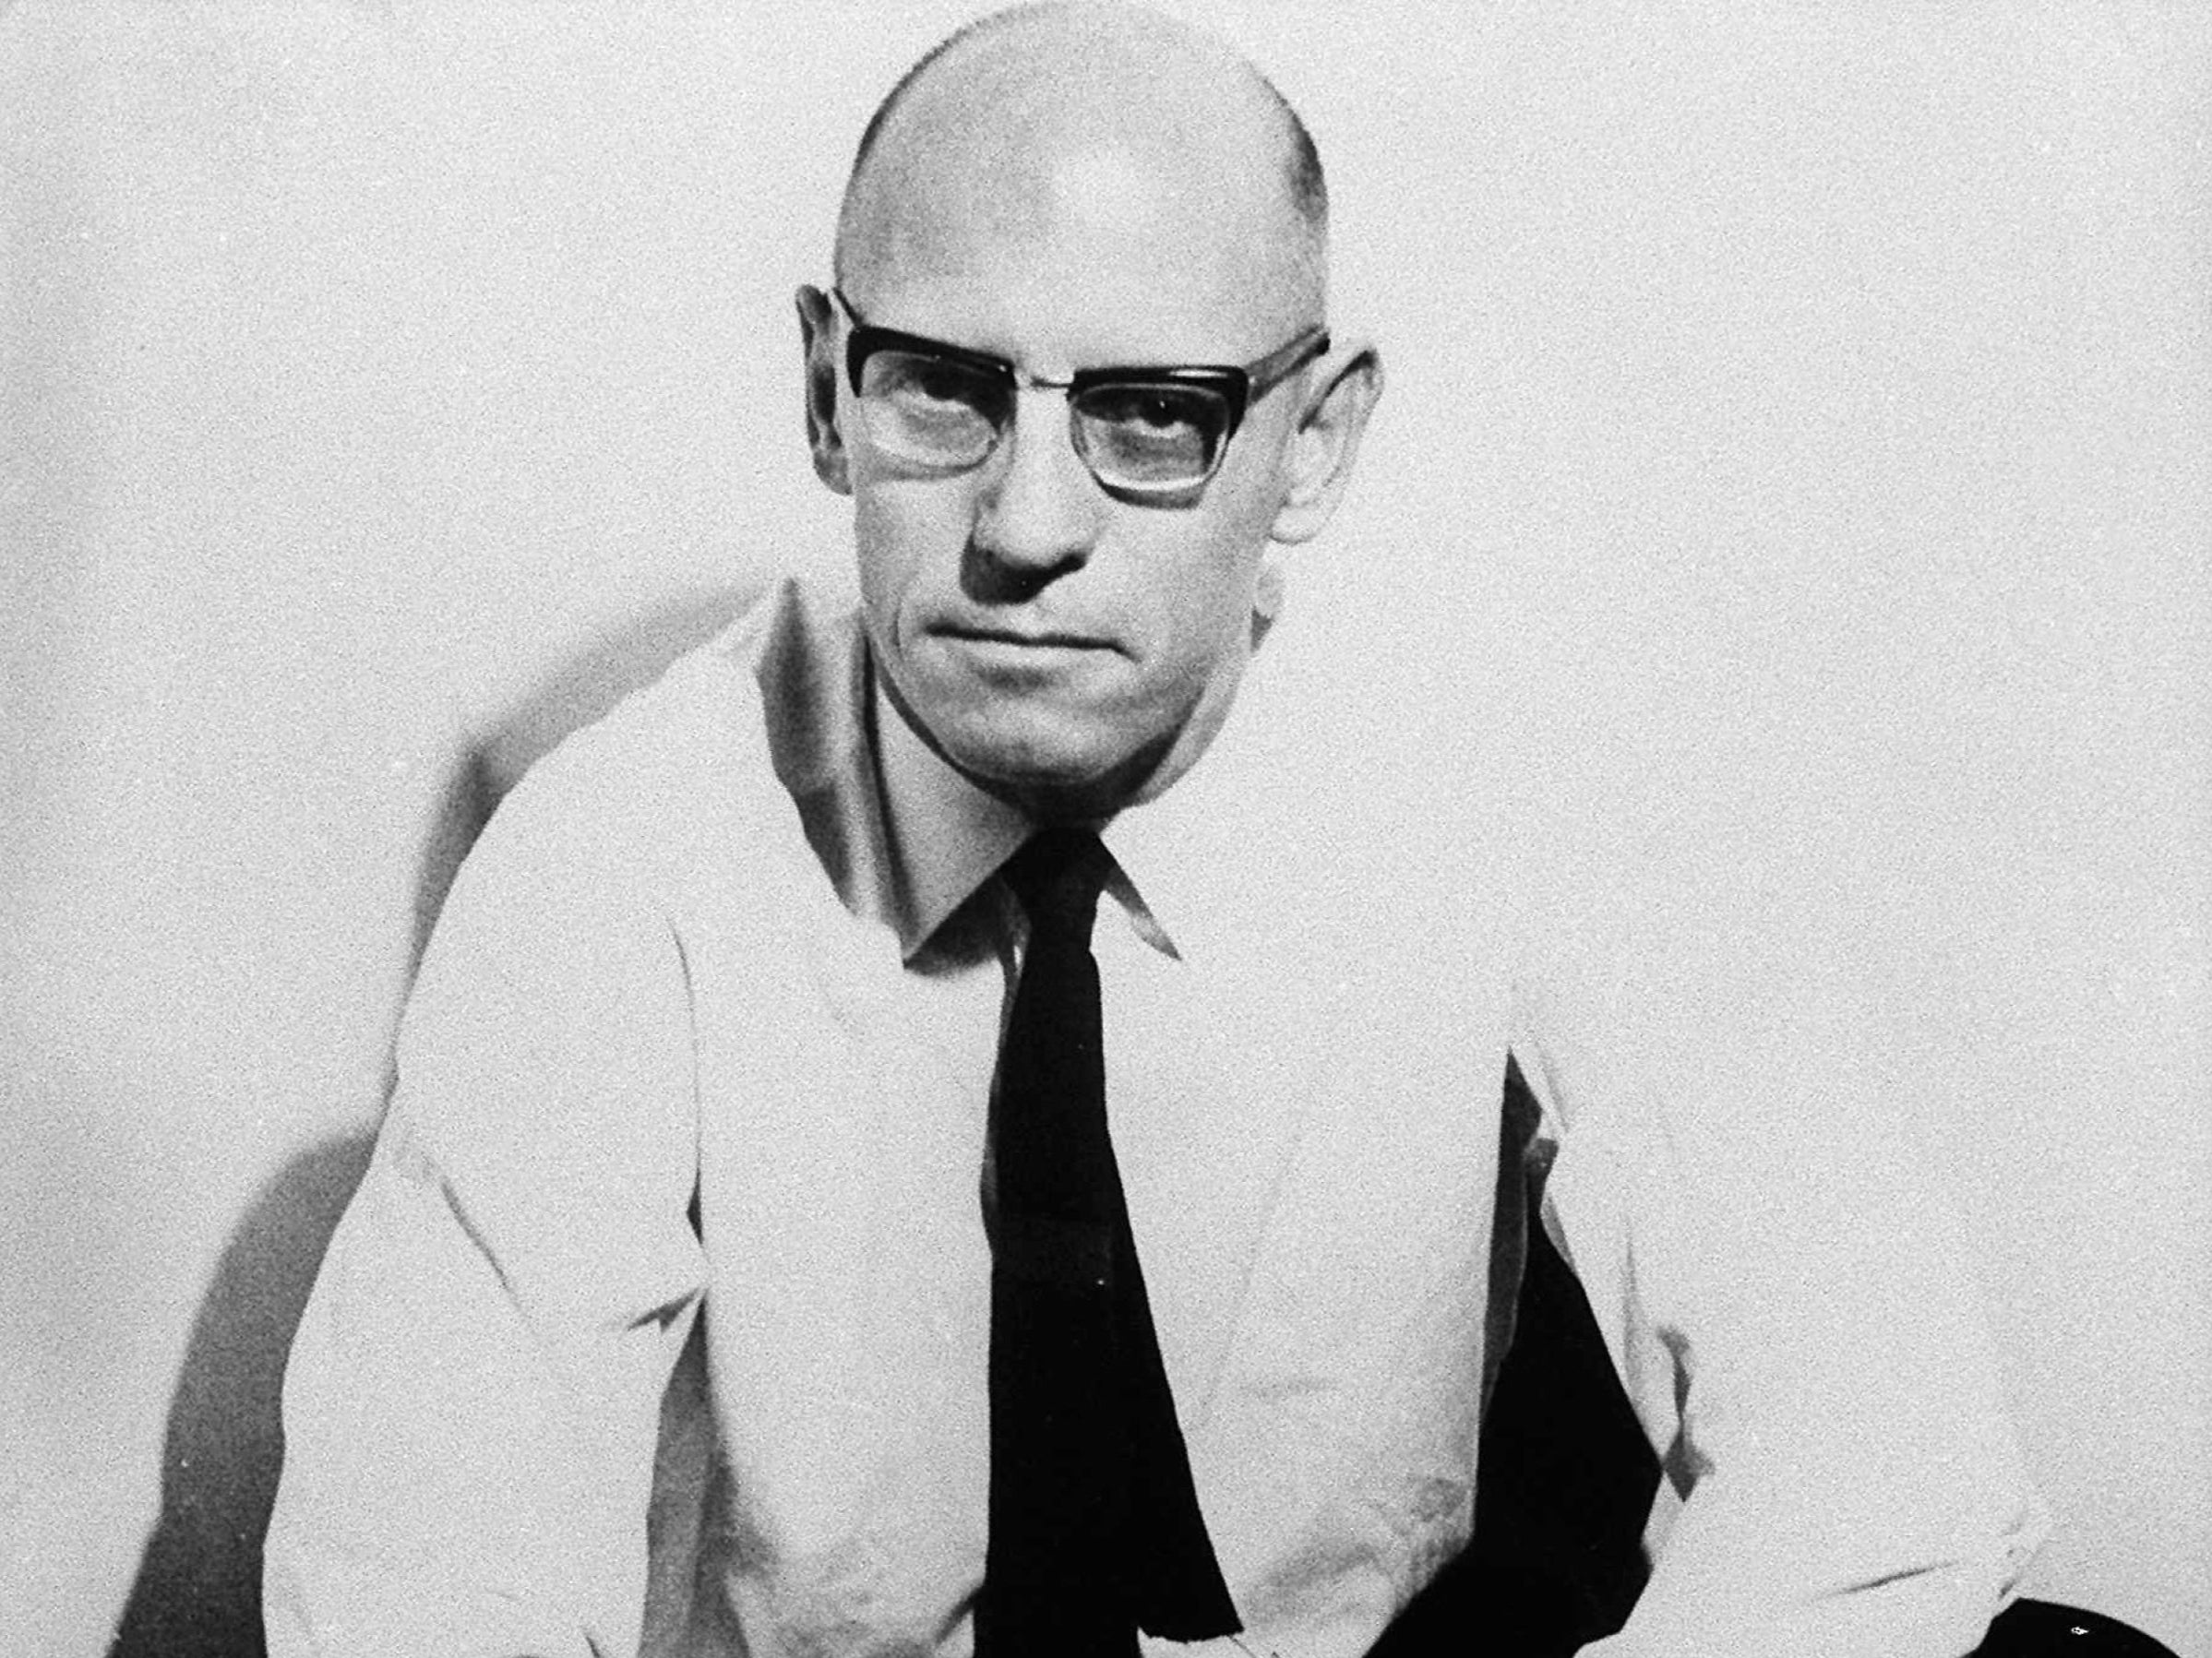 Michel Foucault had original and interesting things to say about power, knowledge and subjectivity